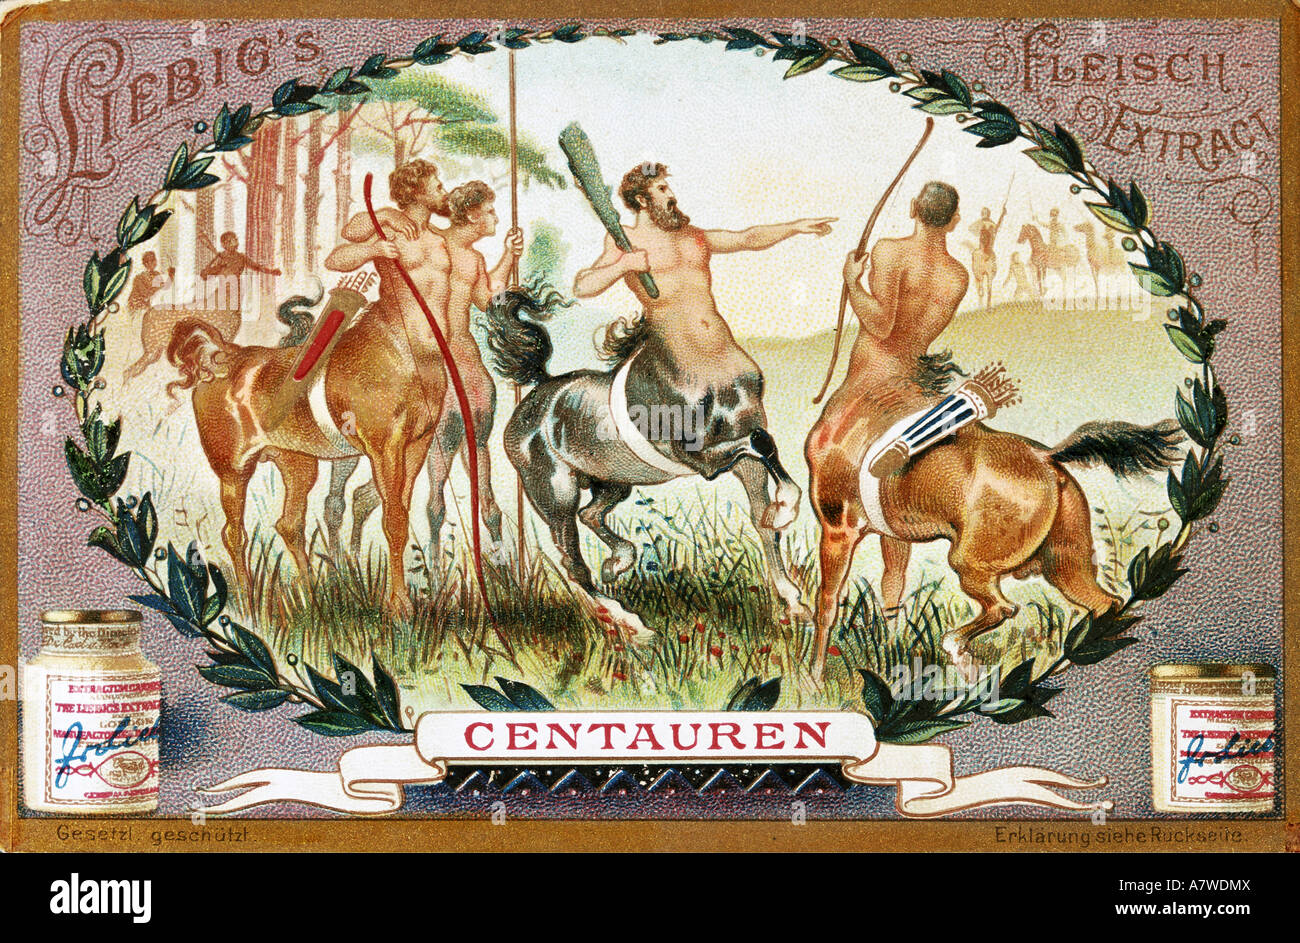 advertising, food, 'Liebigs Fleisch-Extract', lithograph, 'Centaurs', Germany 1900/1910, private collection, , Stock Photo